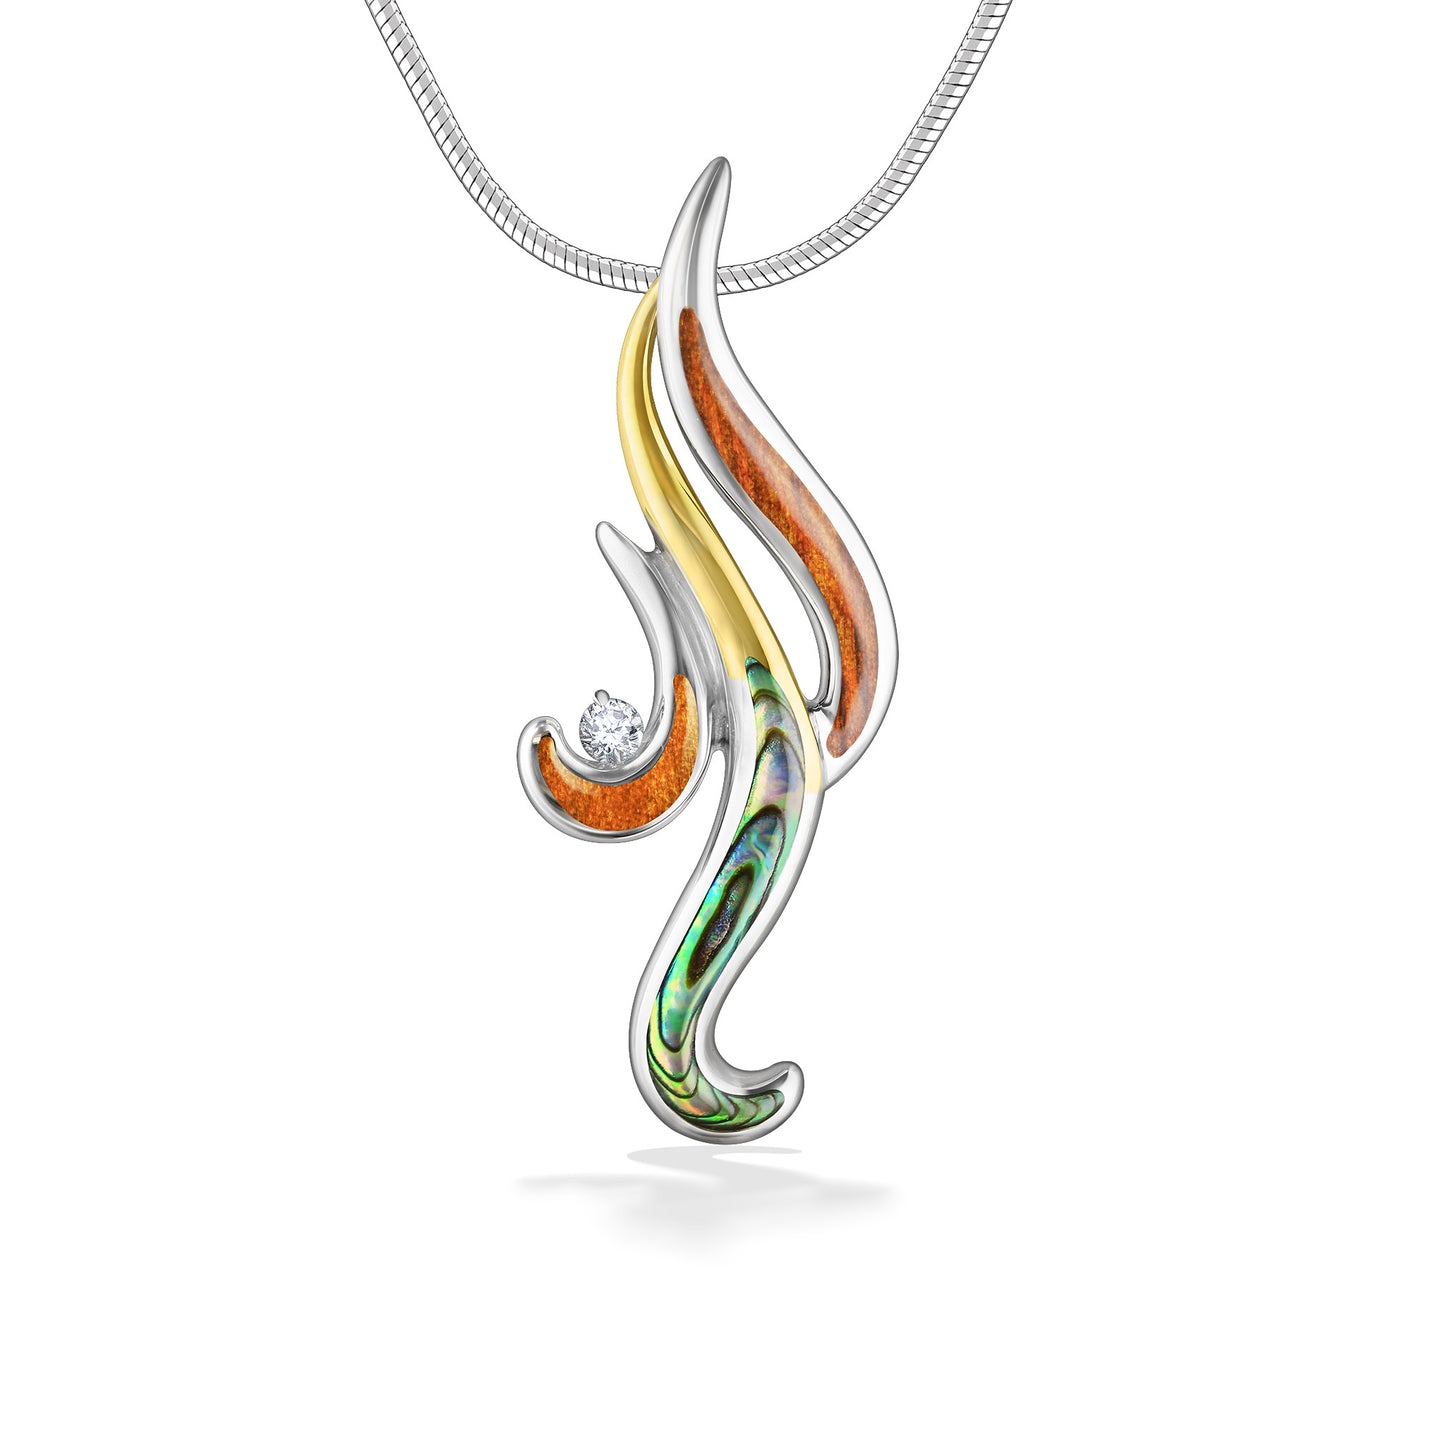 44257 - 18K Yellow Gold and Sterling Silver - Waterfall Pendant